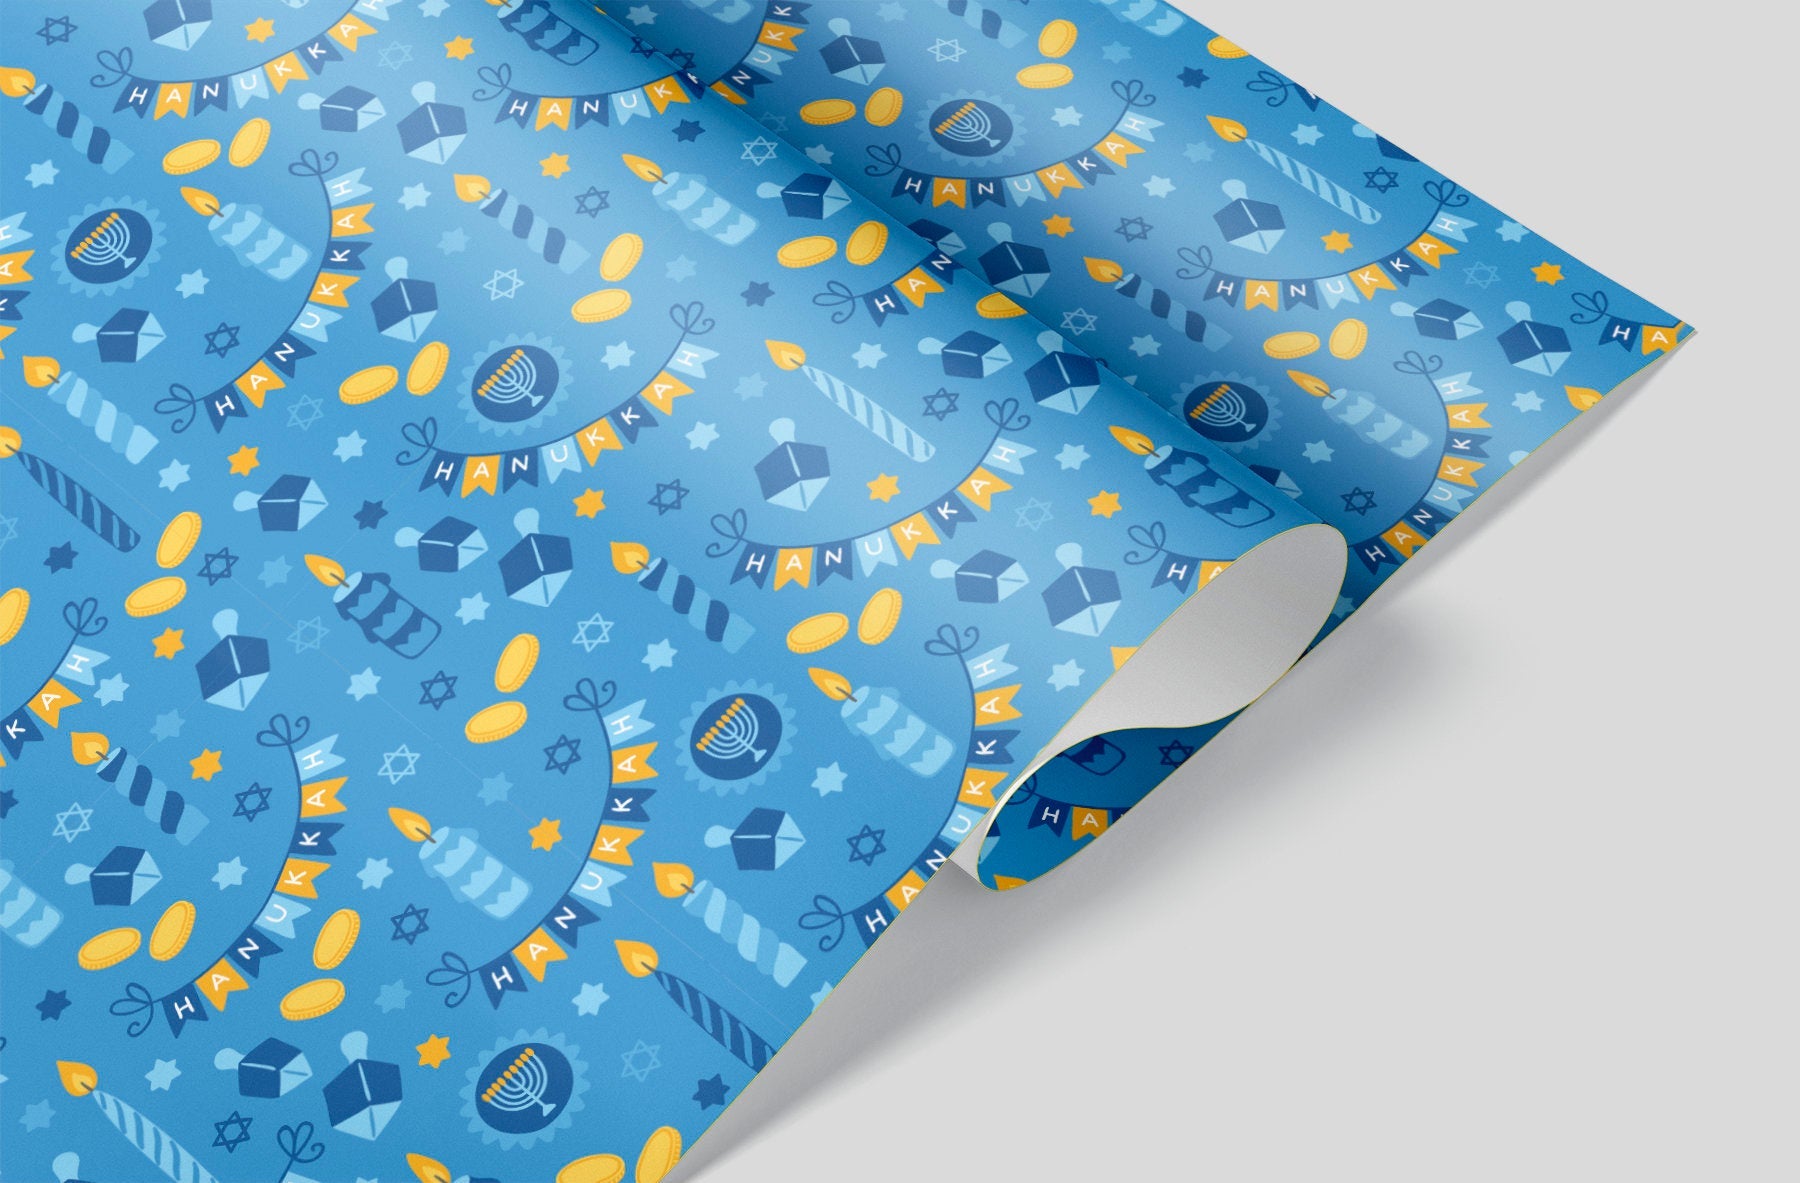 Blue Hanukkah wrapping paper with Candles, menorah, dreidels and the star of david